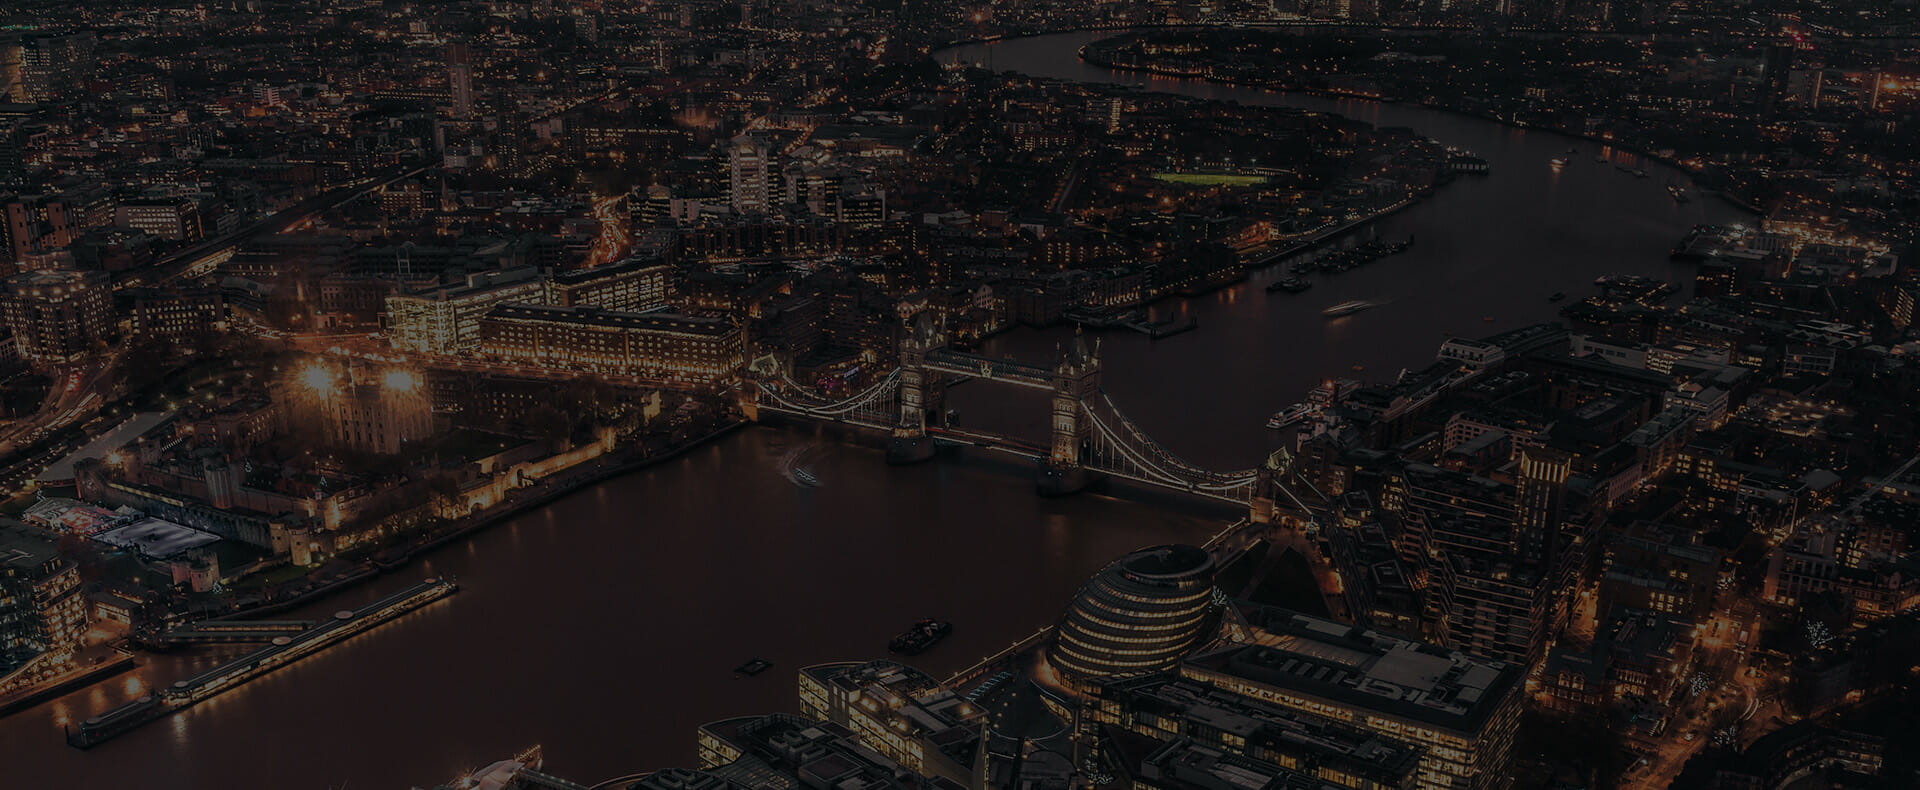 Aerial view of the river thames and tower bridge at night with buildings across London lit up.